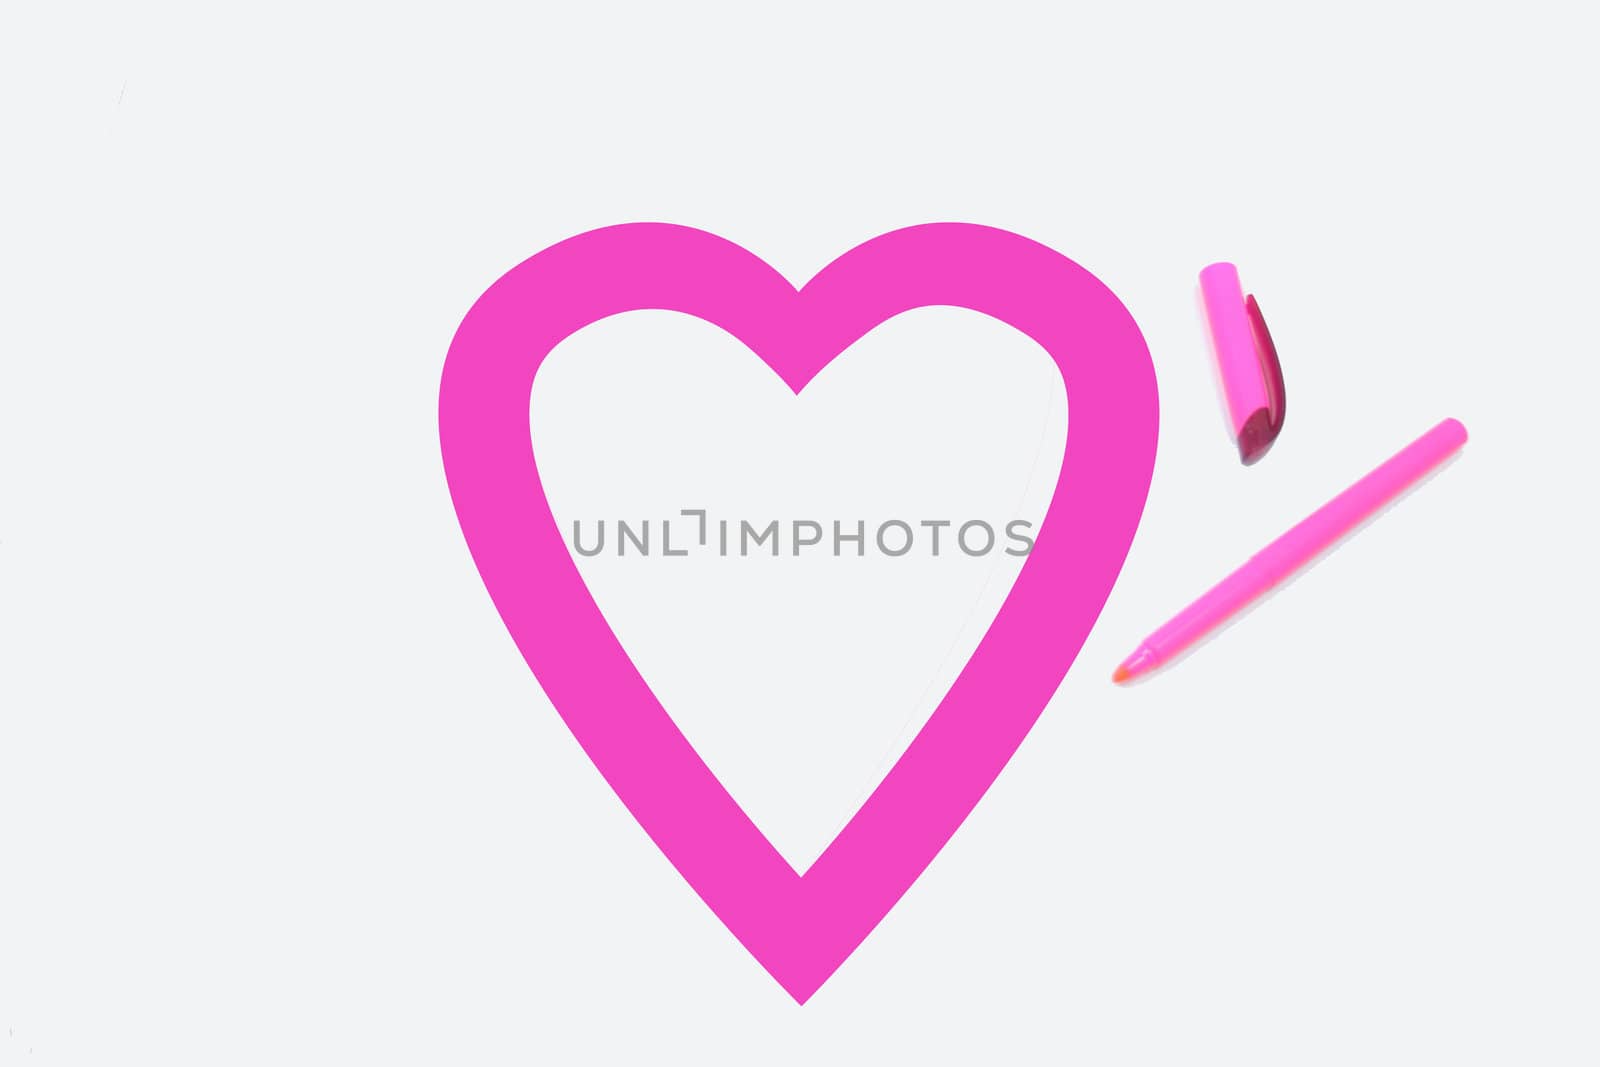 Heart shape colored pink by office highlighter on white background